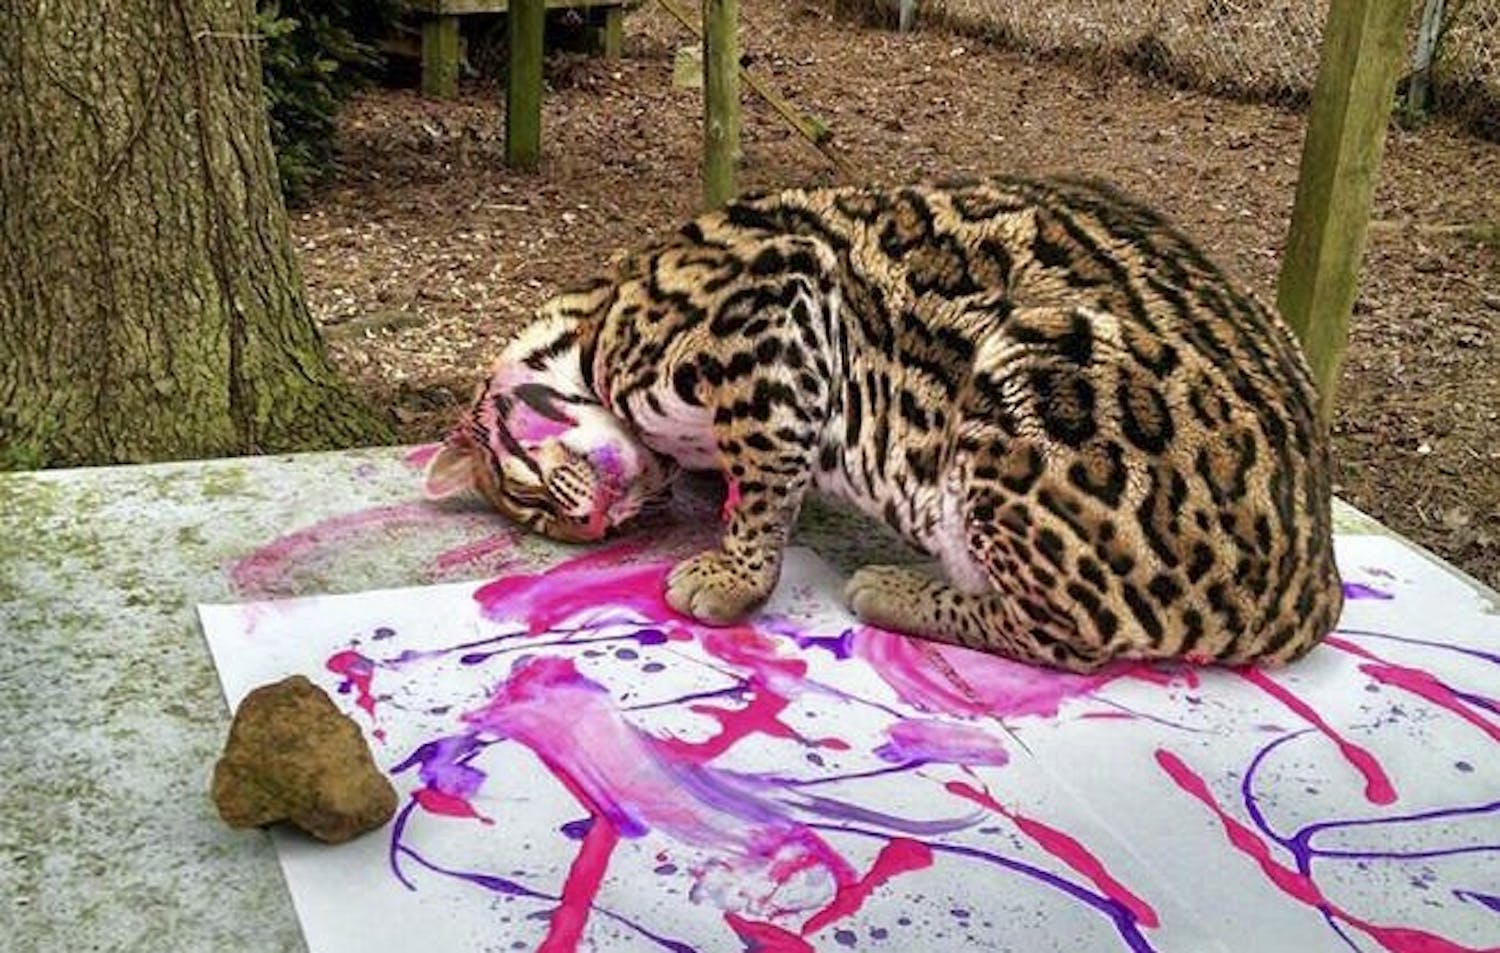 Petee Ocelot paints with purple and pink egg-based tempera at Carolina Tiger Rescue in Pittsboro. (Courtesy of Carolina Tiger Rescue)